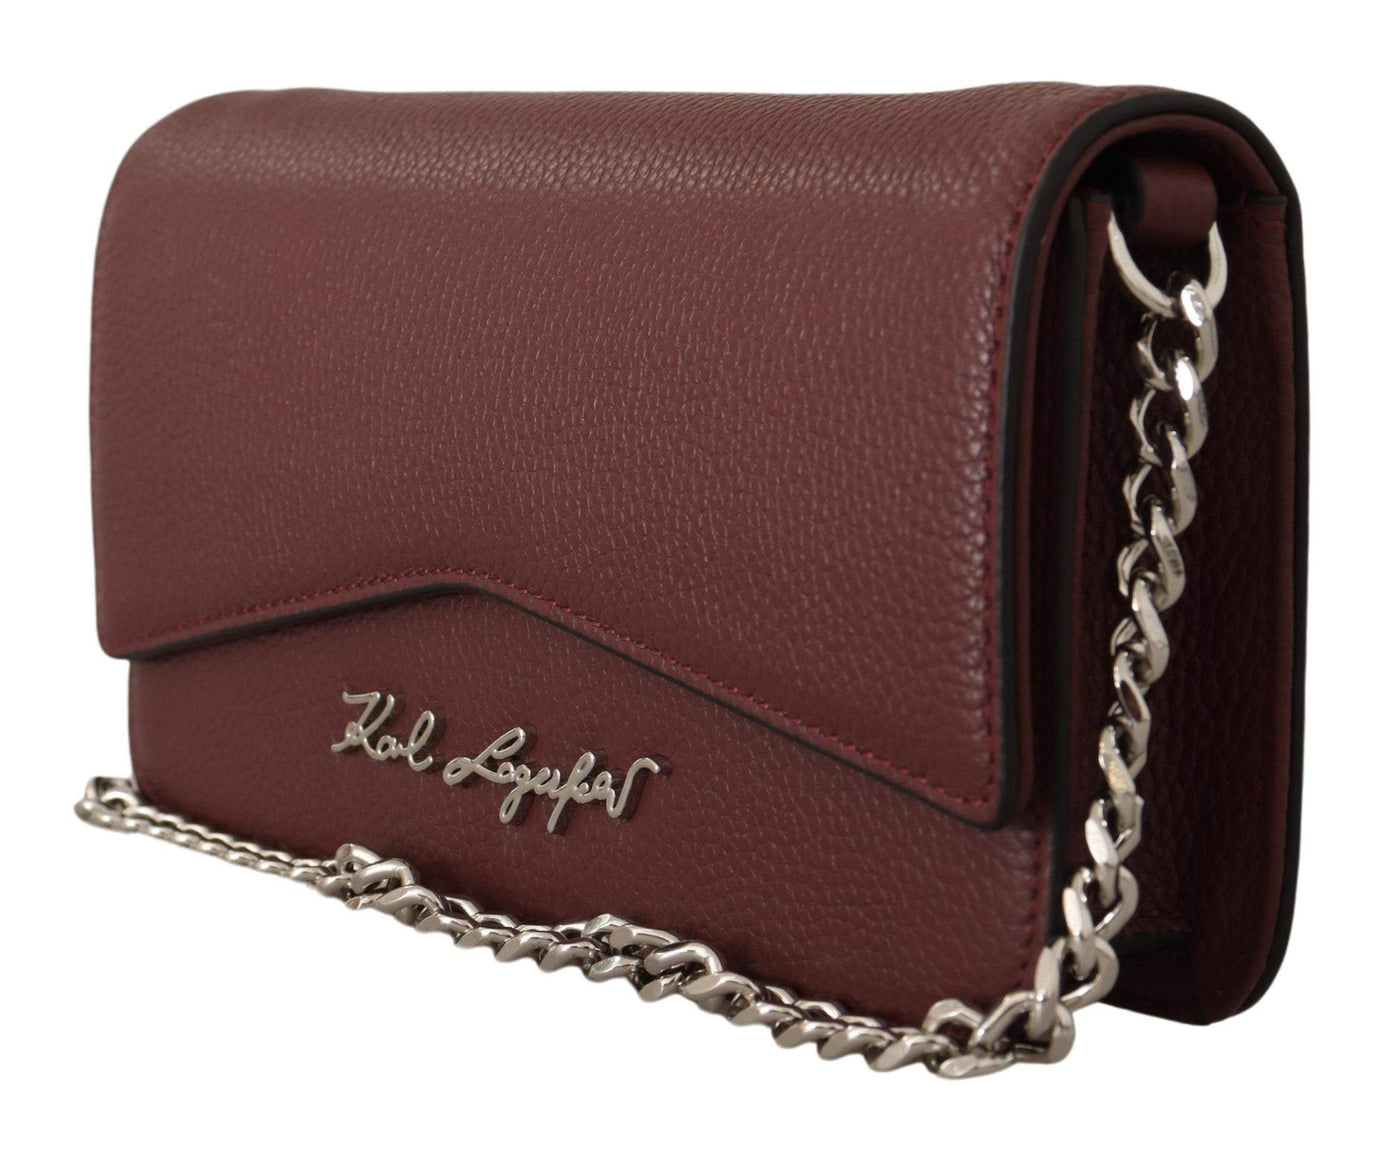 Karl Lagerfeld Wine Leather Evening Clutch Bag Brown, Clutch Bags - Women - Bags, feed-1, Handbags - New Arrivals, Karl Lagerfeld, Shoulder Bags - Women - Bags, Women - New Arrivals at SEYMAYKA